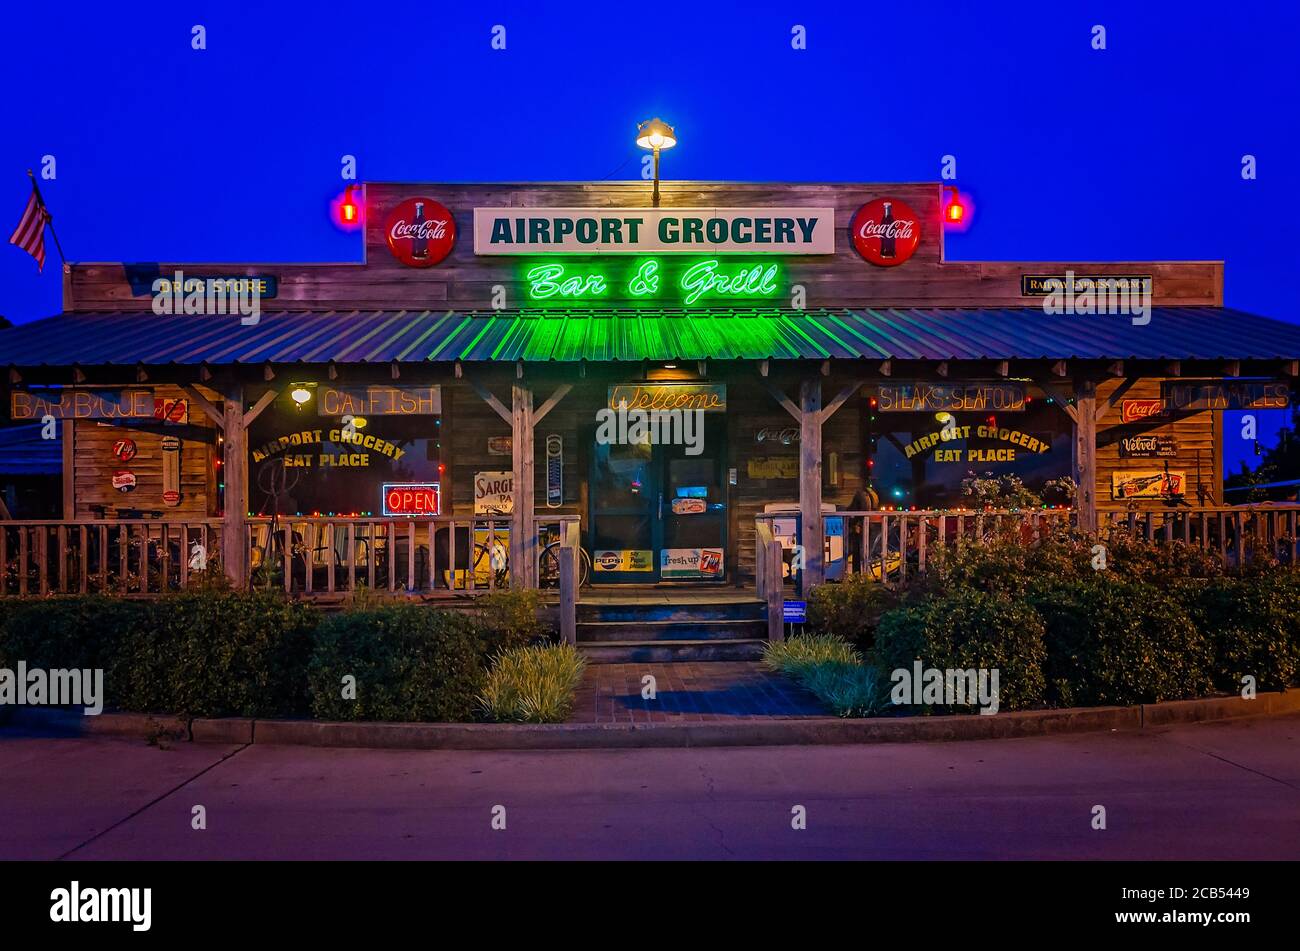 Airport Grocery is pictured at night, Aug. 8, 2016, in Cleveland, Mississippi. The restaurant specializes in Southern soul food and blues music. Stock Photo